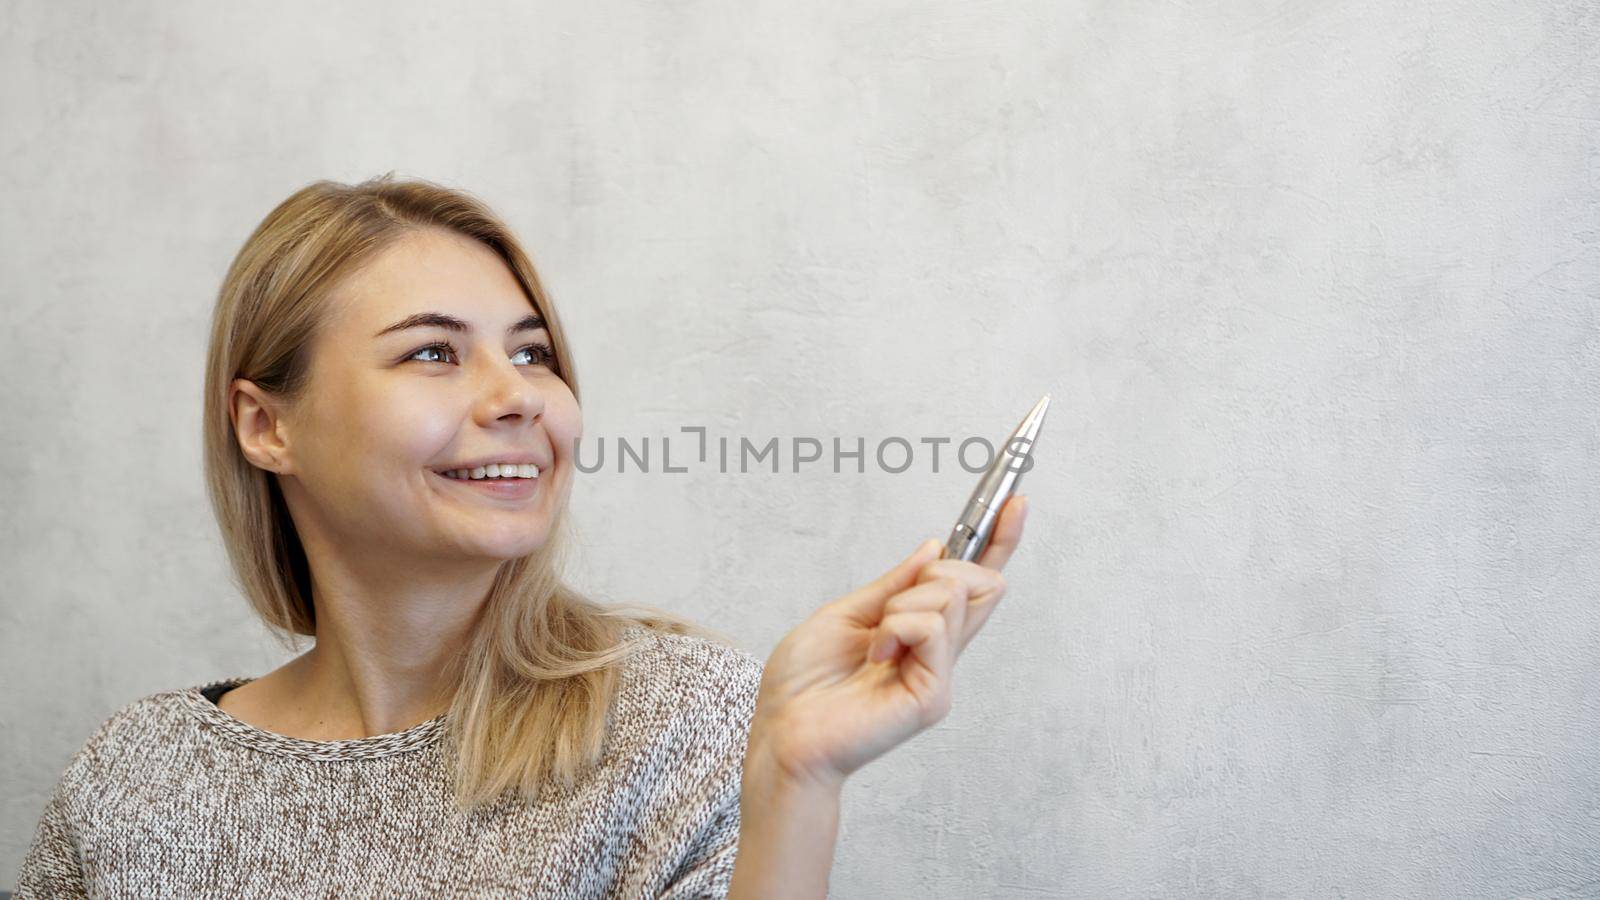 The woman shows with a pen on a gray wall. Place for information - graphics, inscriptions, banners